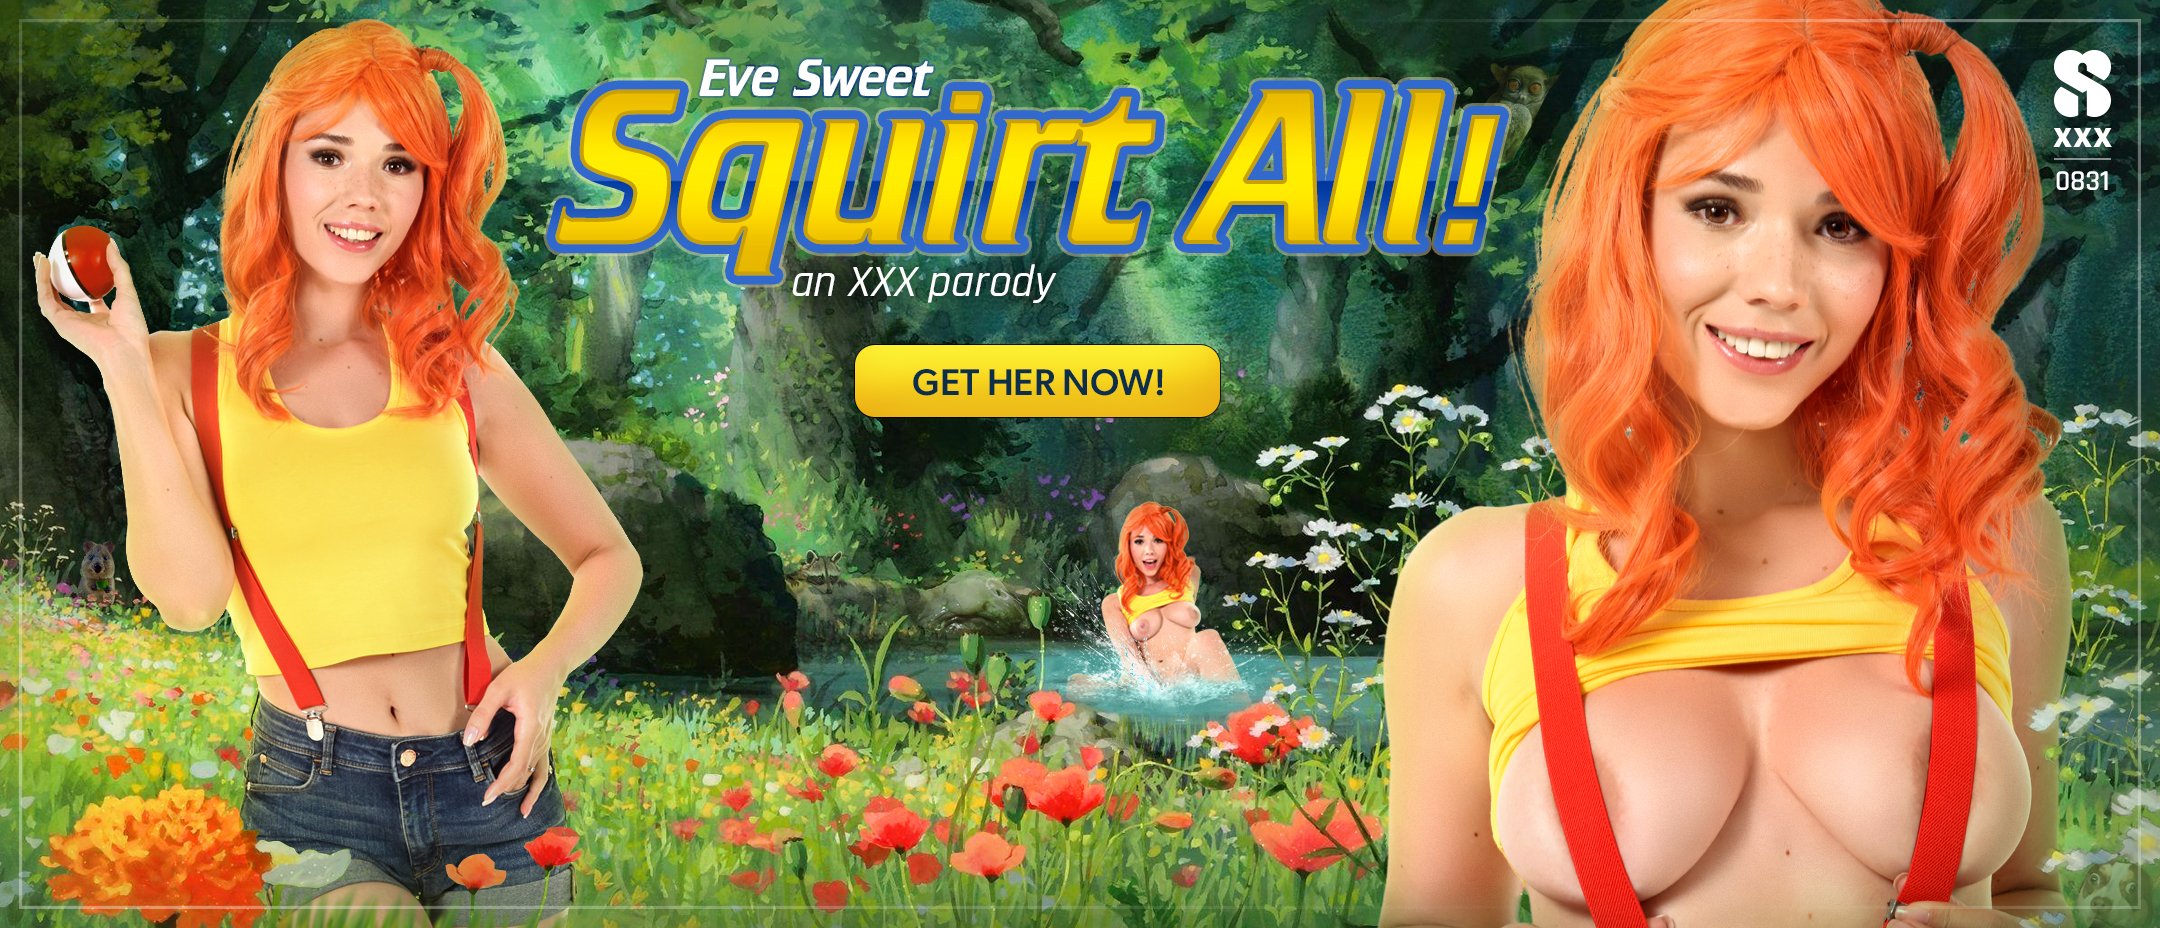 Eve Sweet - Squirt All! - Get her now!